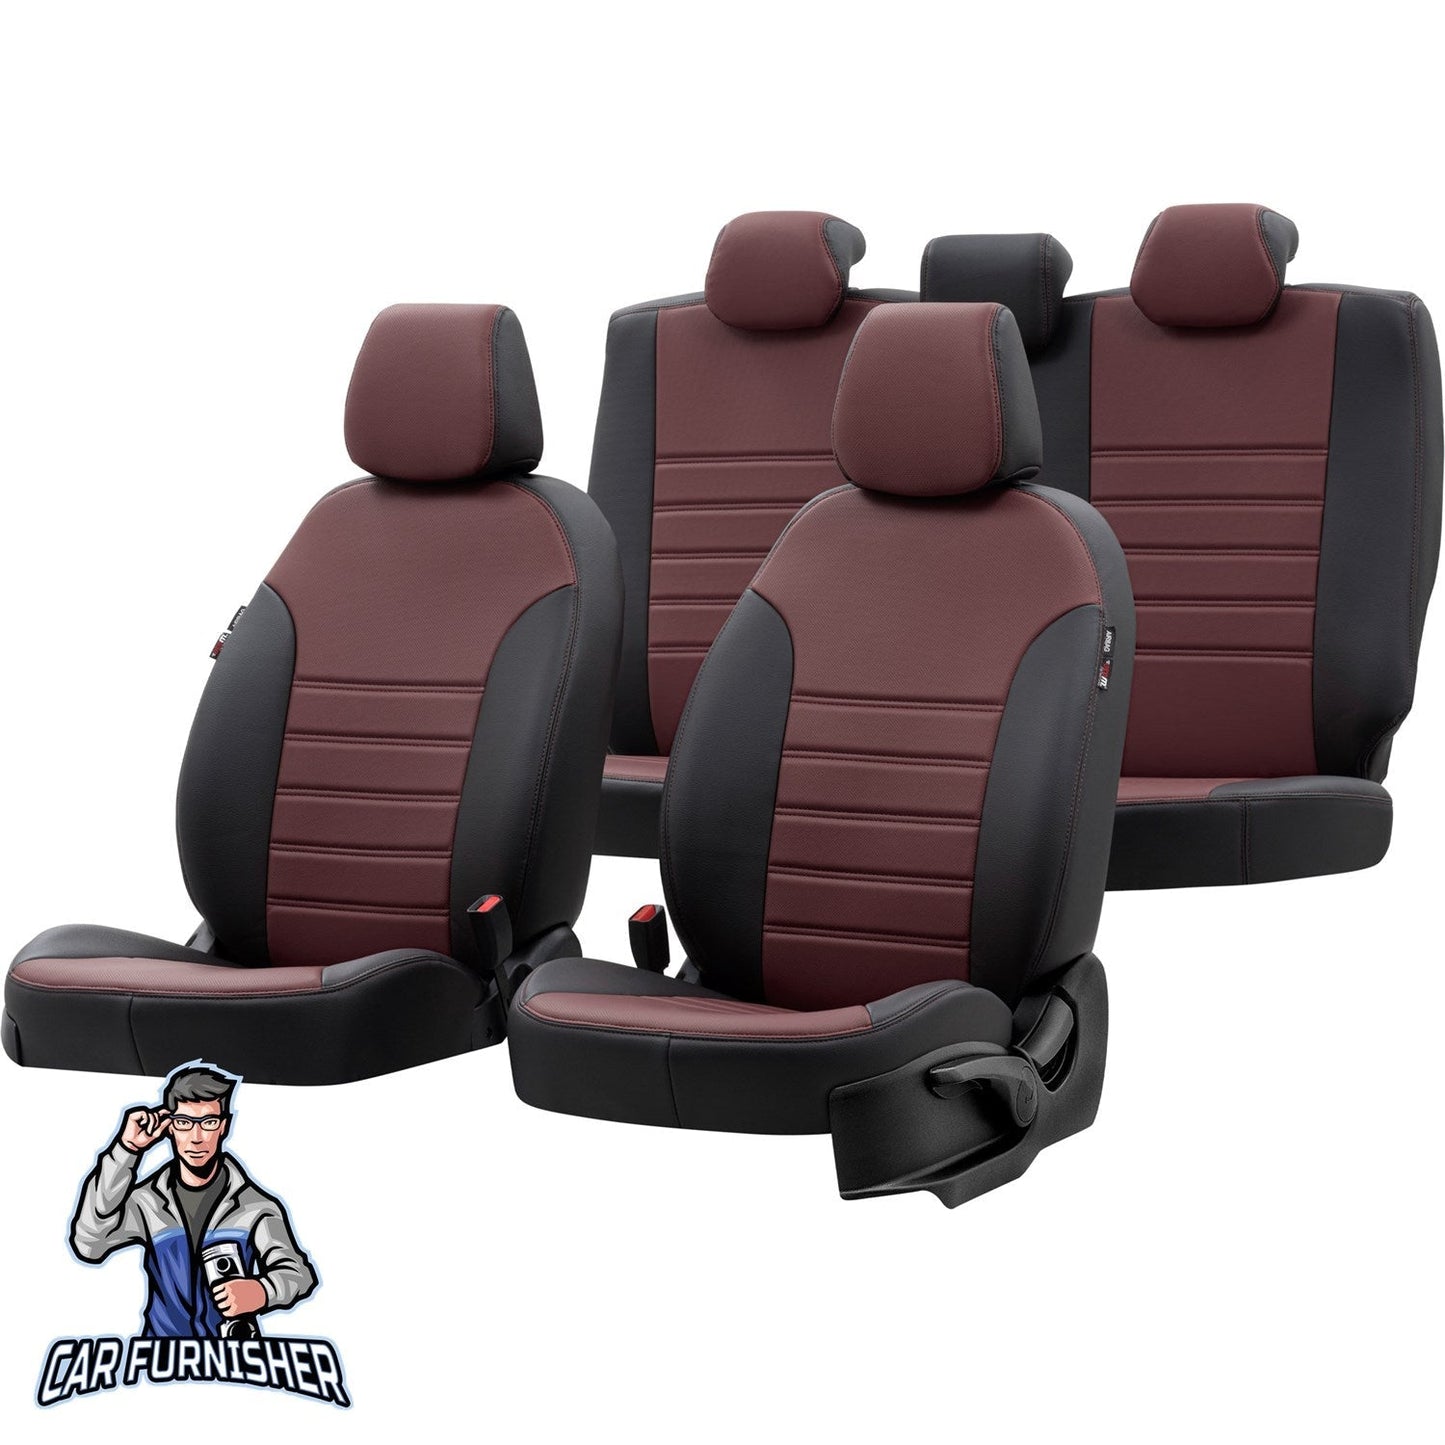 Citroen Jumper Seat Covers Istanbul Leather Design Burgundy Leather